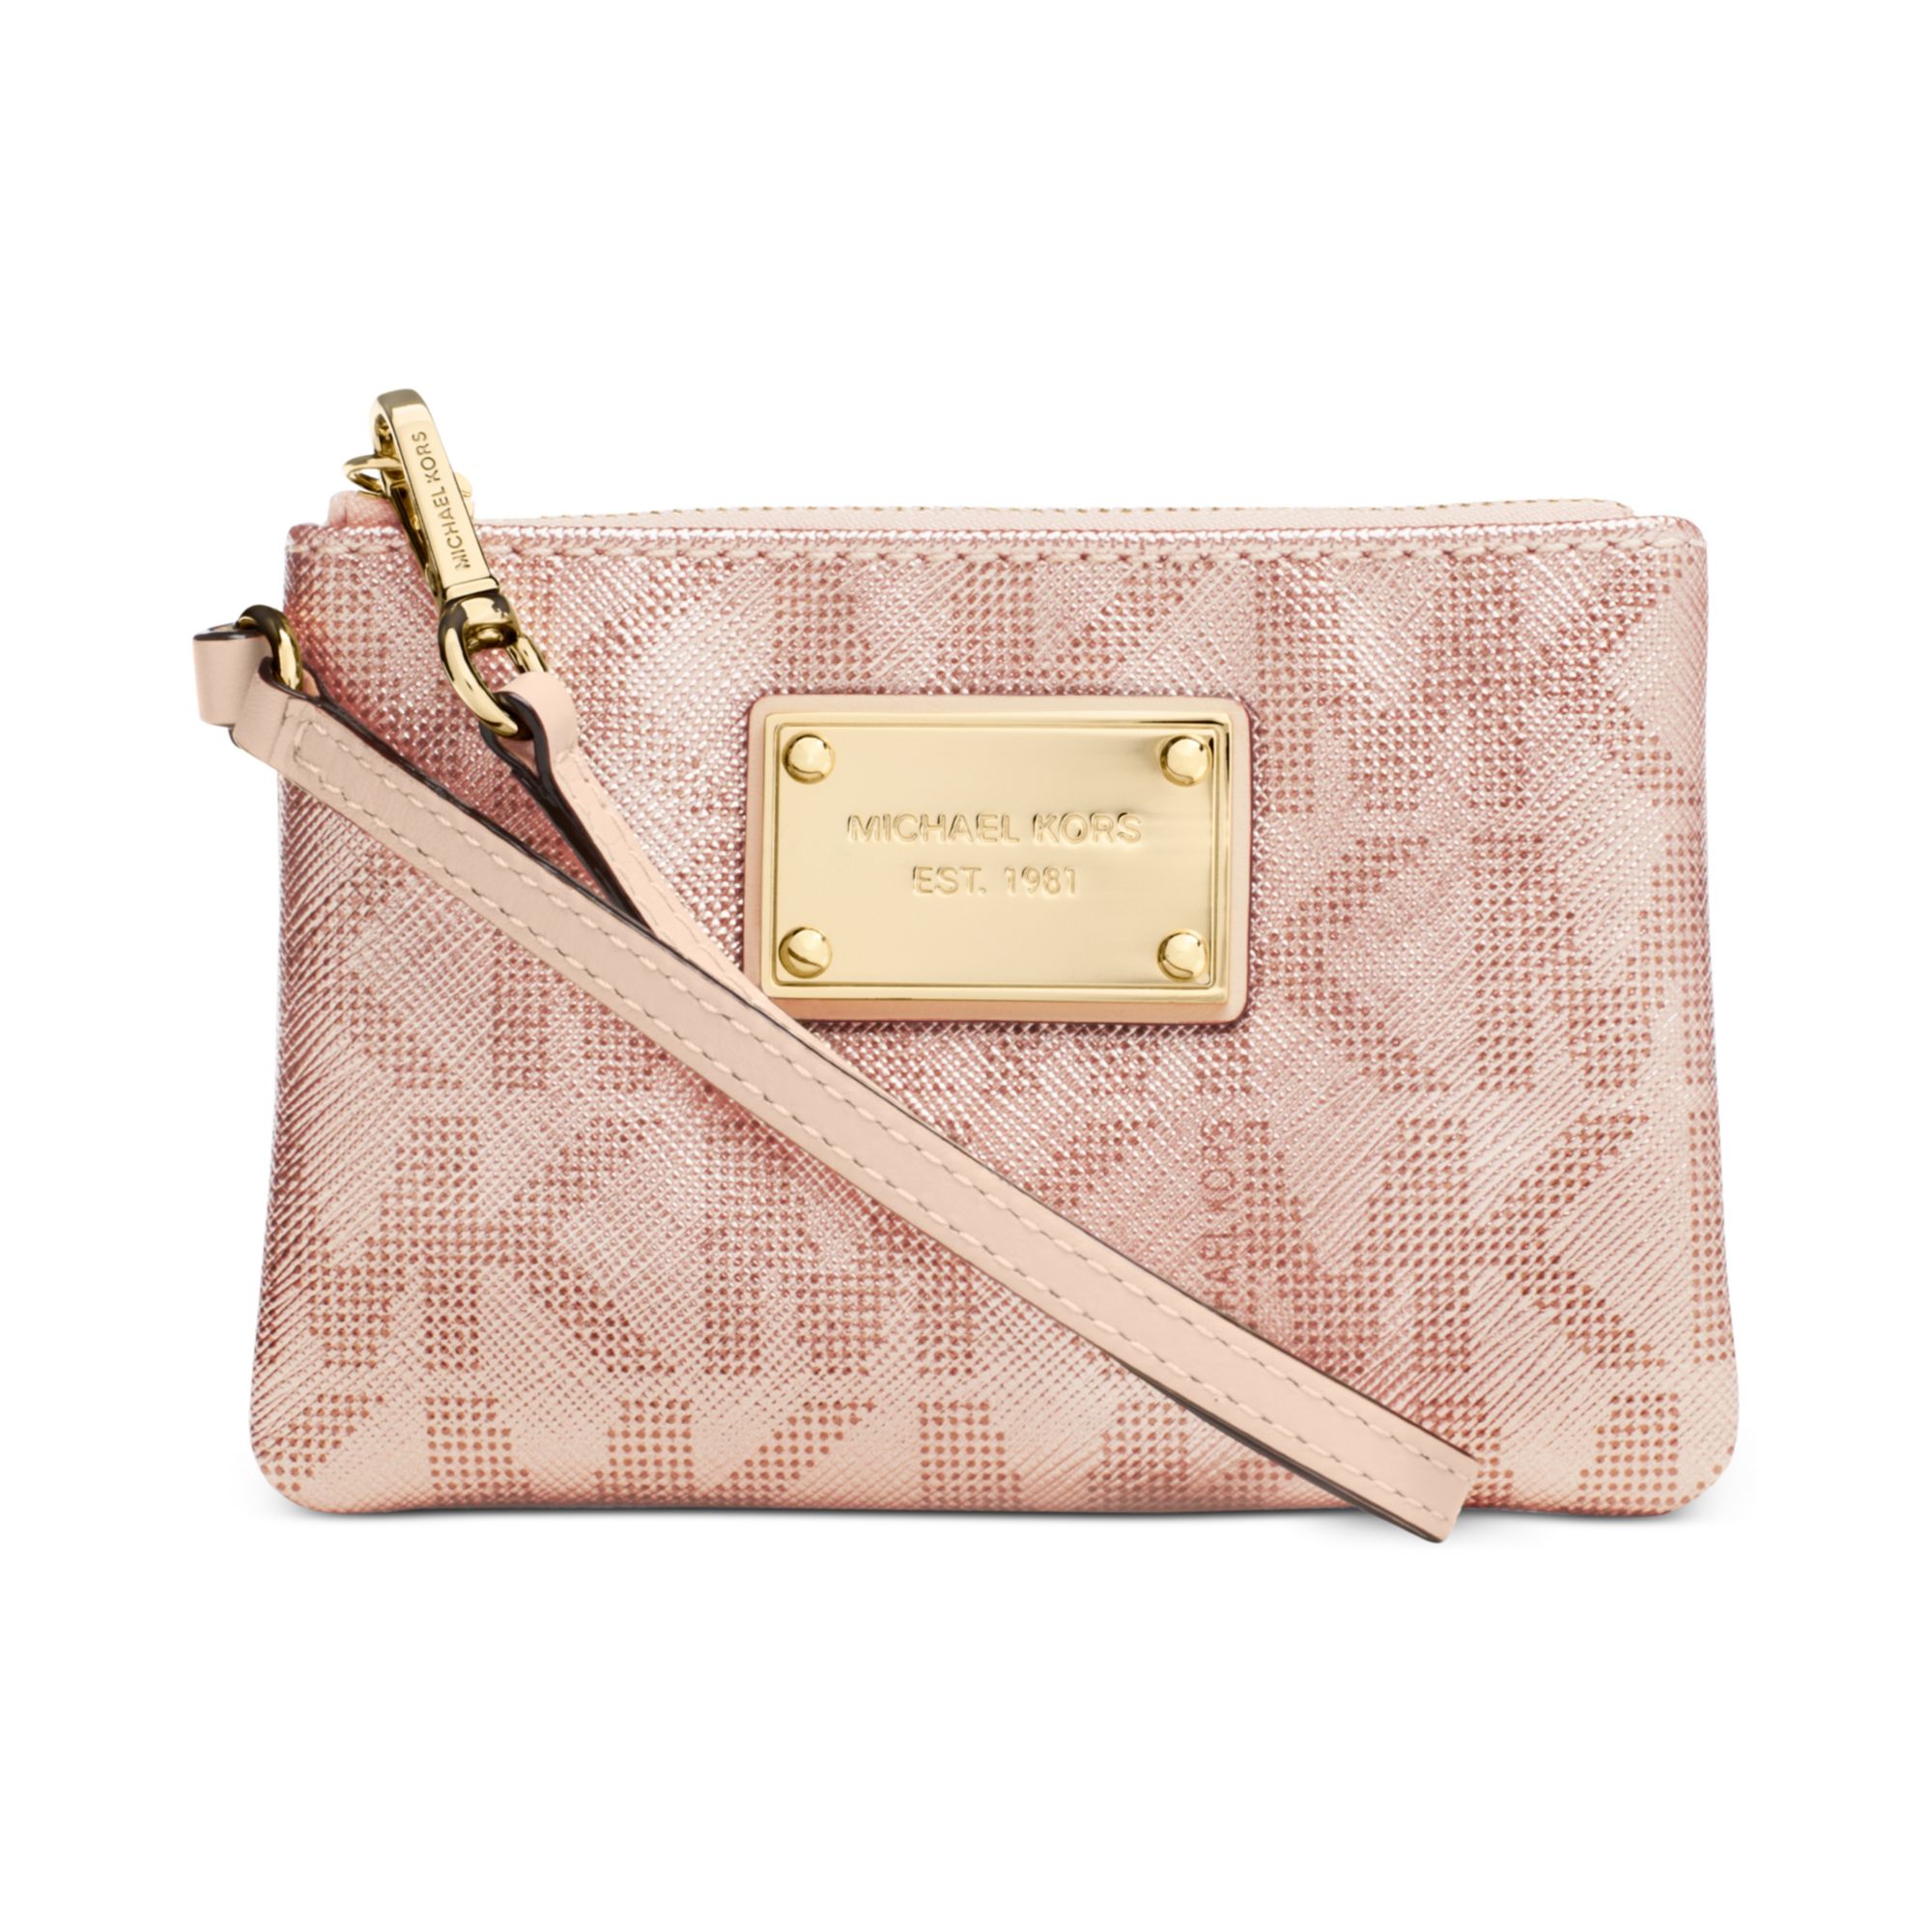 Michael Kors Small Signature Wristlet in Rose Gold (Pink) - Lyst